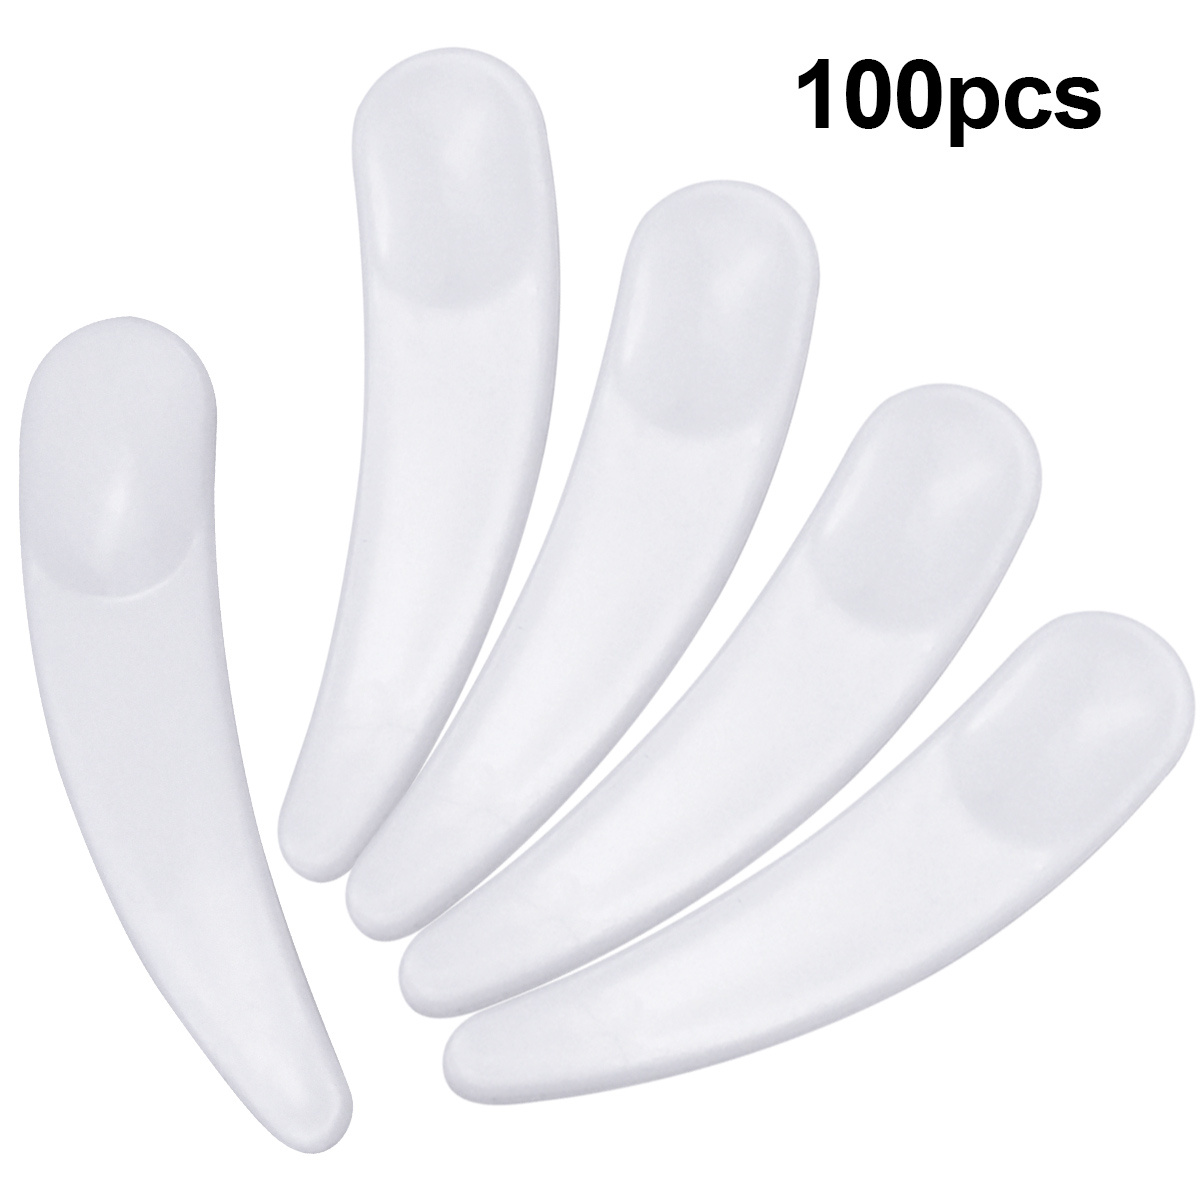 

100 Pcs Curved Disposable Facial Cream Spatulas For Waxing And Makeup Application - Easy To Use And Clean